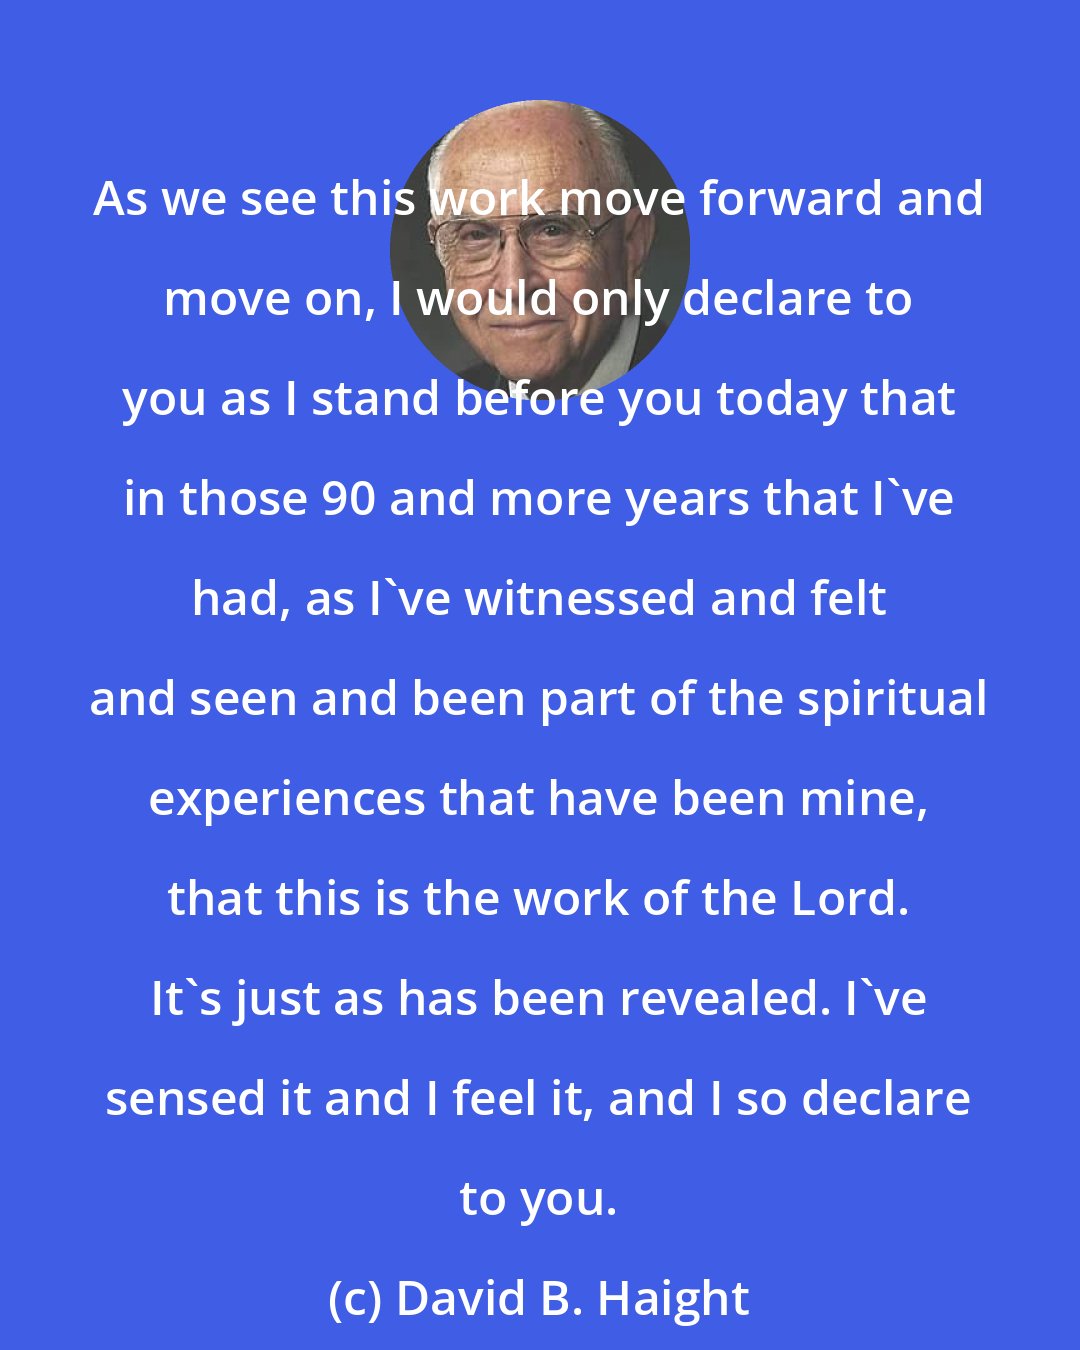 David B. Haight: As we see this work move forward and move on, I would only declare to you as I stand before you today that in those 90 and more years that I've had, as I've witnessed and felt and seen and been part of the spiritual experiences that have been mine, that this is the work of the Lord. It's just as has been revealed. I've sensed it and I feel it, and I so declare to you.